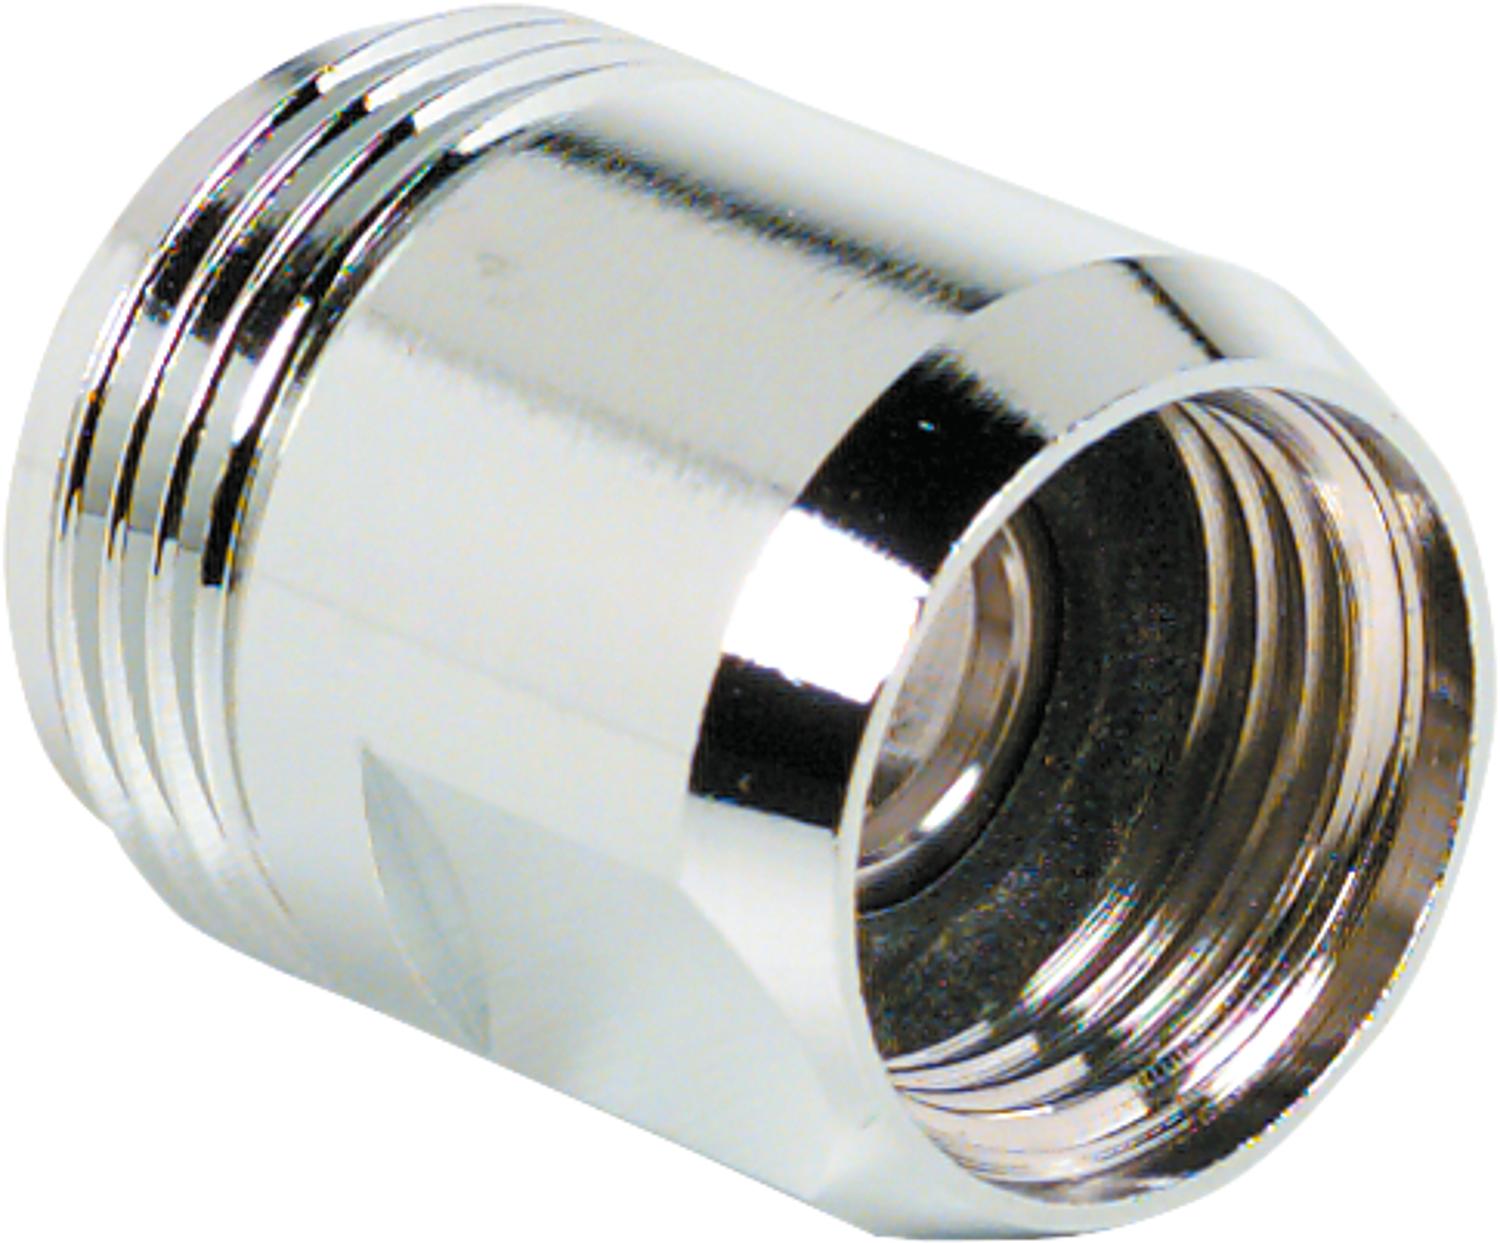 asdec life ® reducer brass chrome-plated IT 1/2" to AG 3/4" with 18 mm bore for swivel spouts *BG*